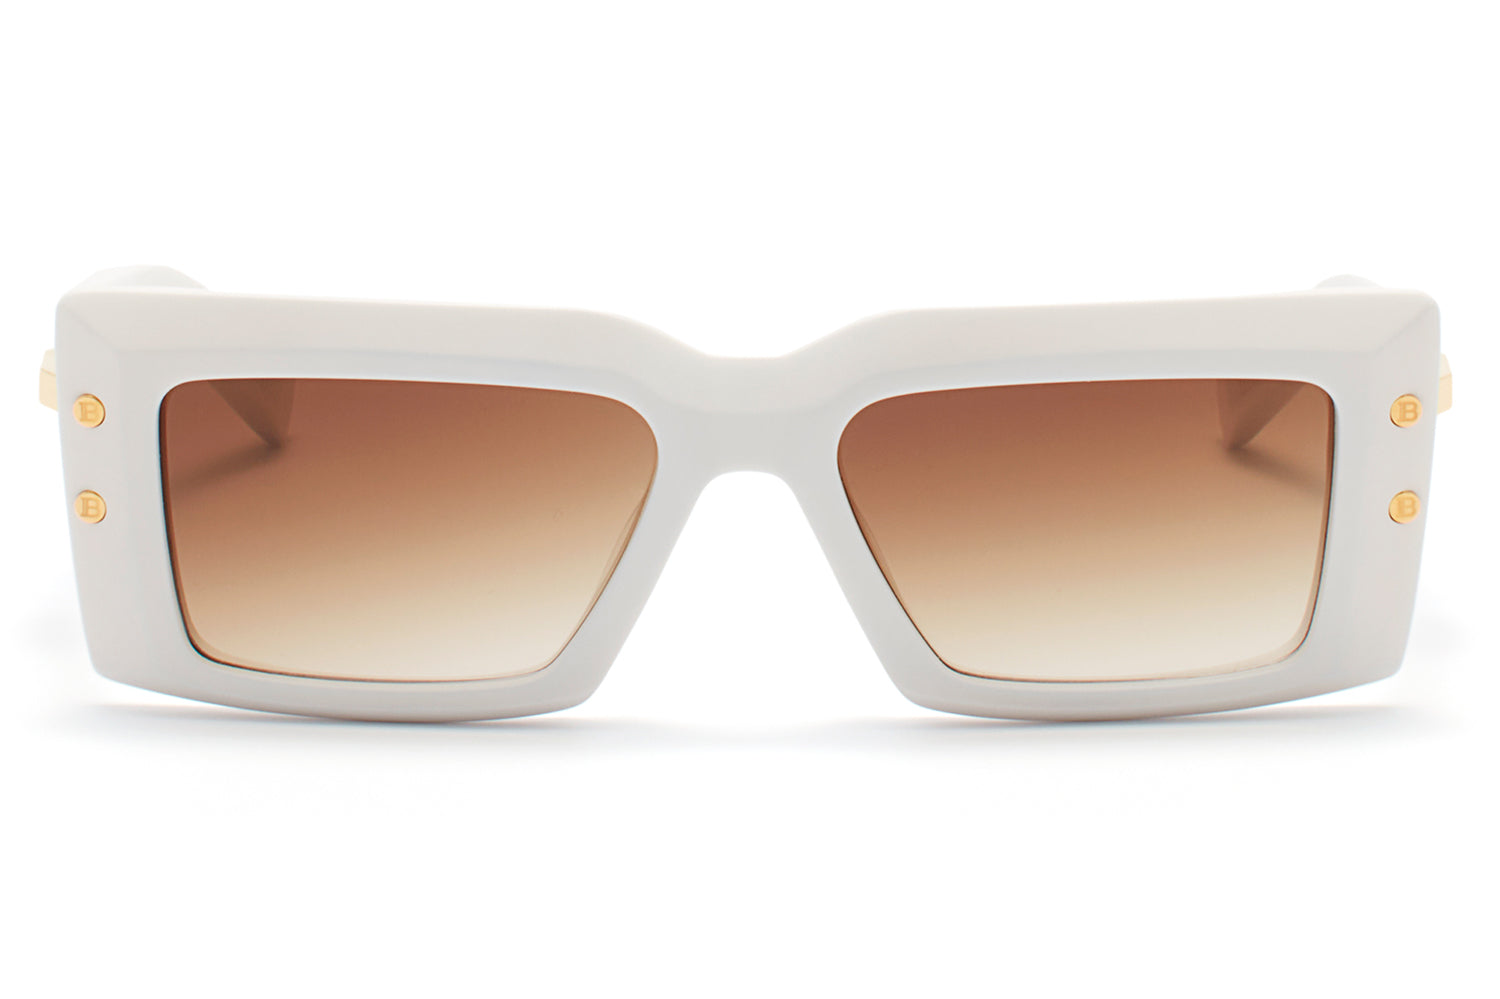 Balmain Eyewear - Imperial Sunglasses | Specs Collective, Matte White & Yellow Gold with Dark Brown Gradient Lenses